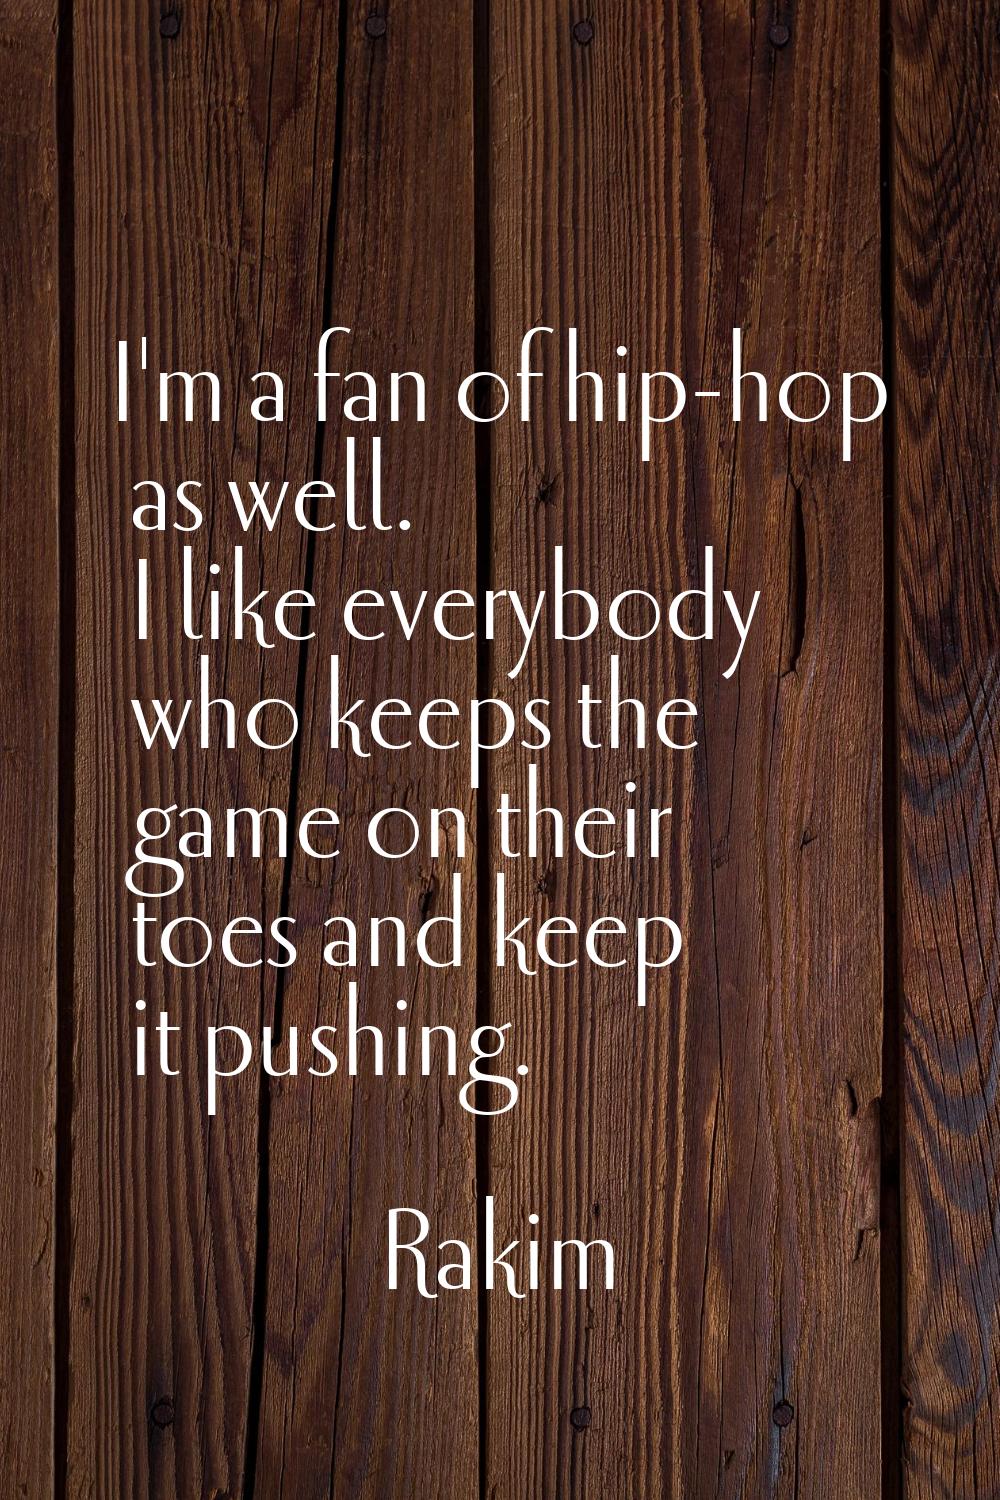 I'm a fan of hip-hop as well. I like everybody who keeps the game on their toes and keep it pushing